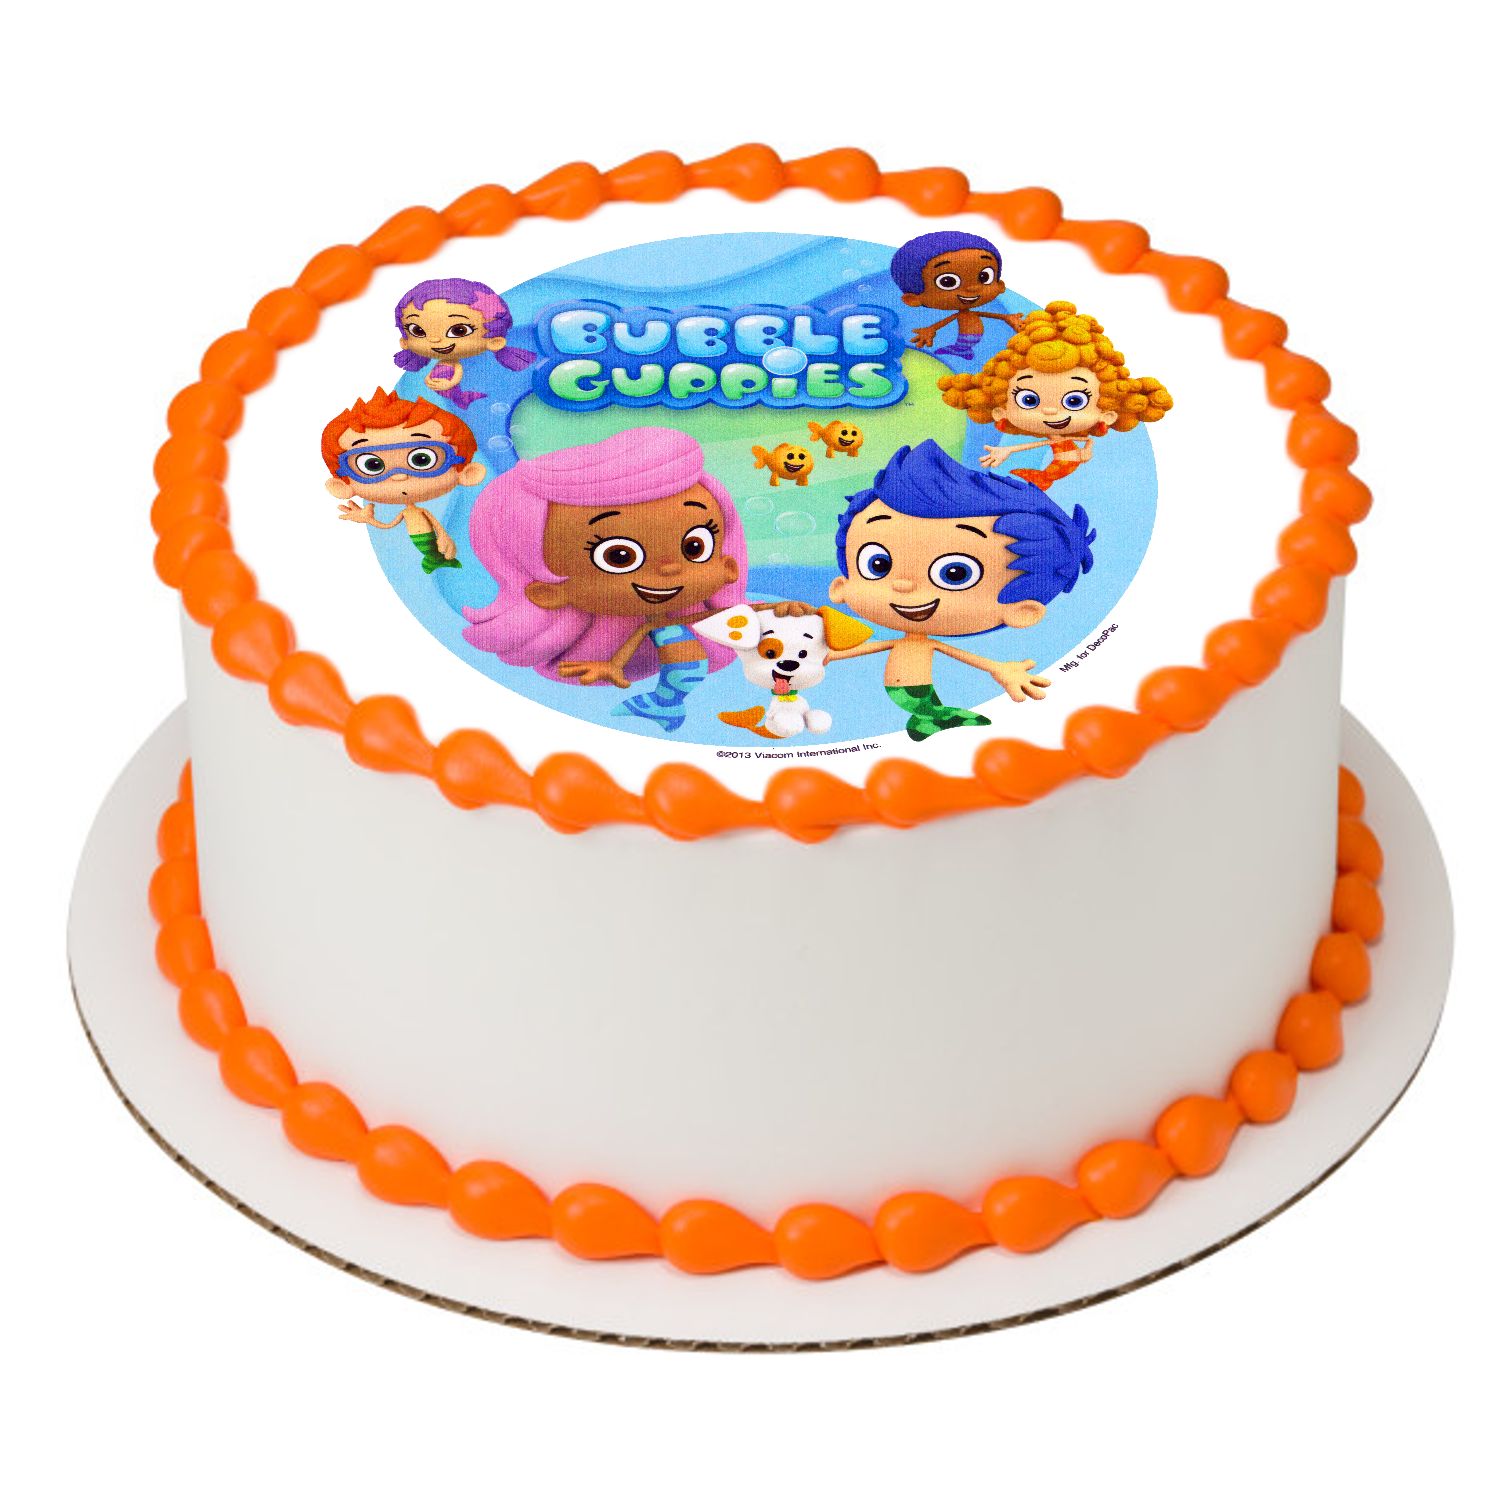 BUBBLE GUPPIES Edible Party Cake topper image decoration 